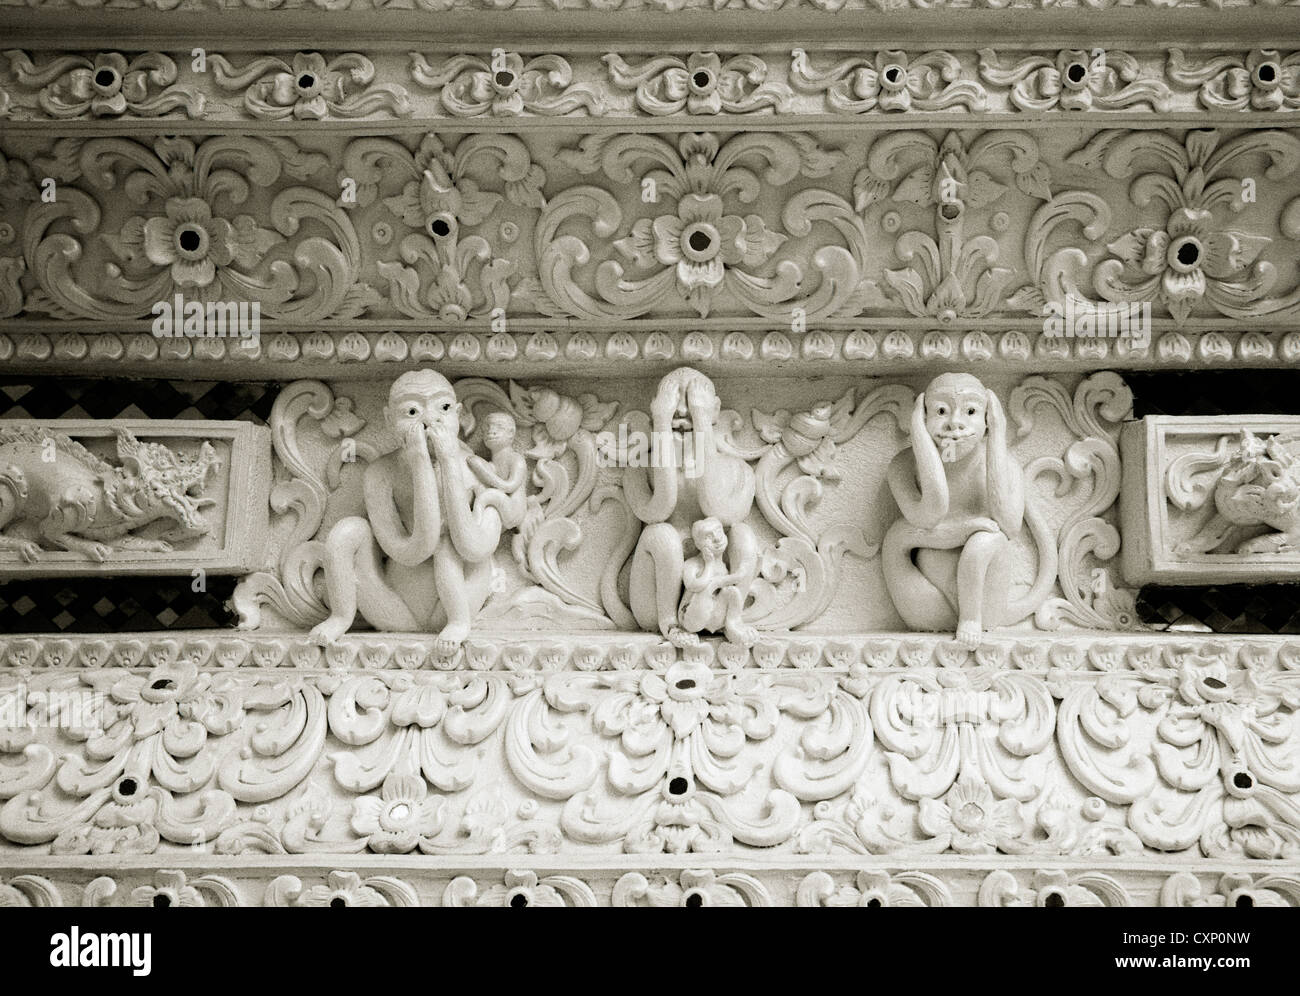 Three wise monkeys in a Buddhist temple in Chiang Mai in Thailand in Far East Southeast Asia. Monkey Culture Art Travel Stock Photo